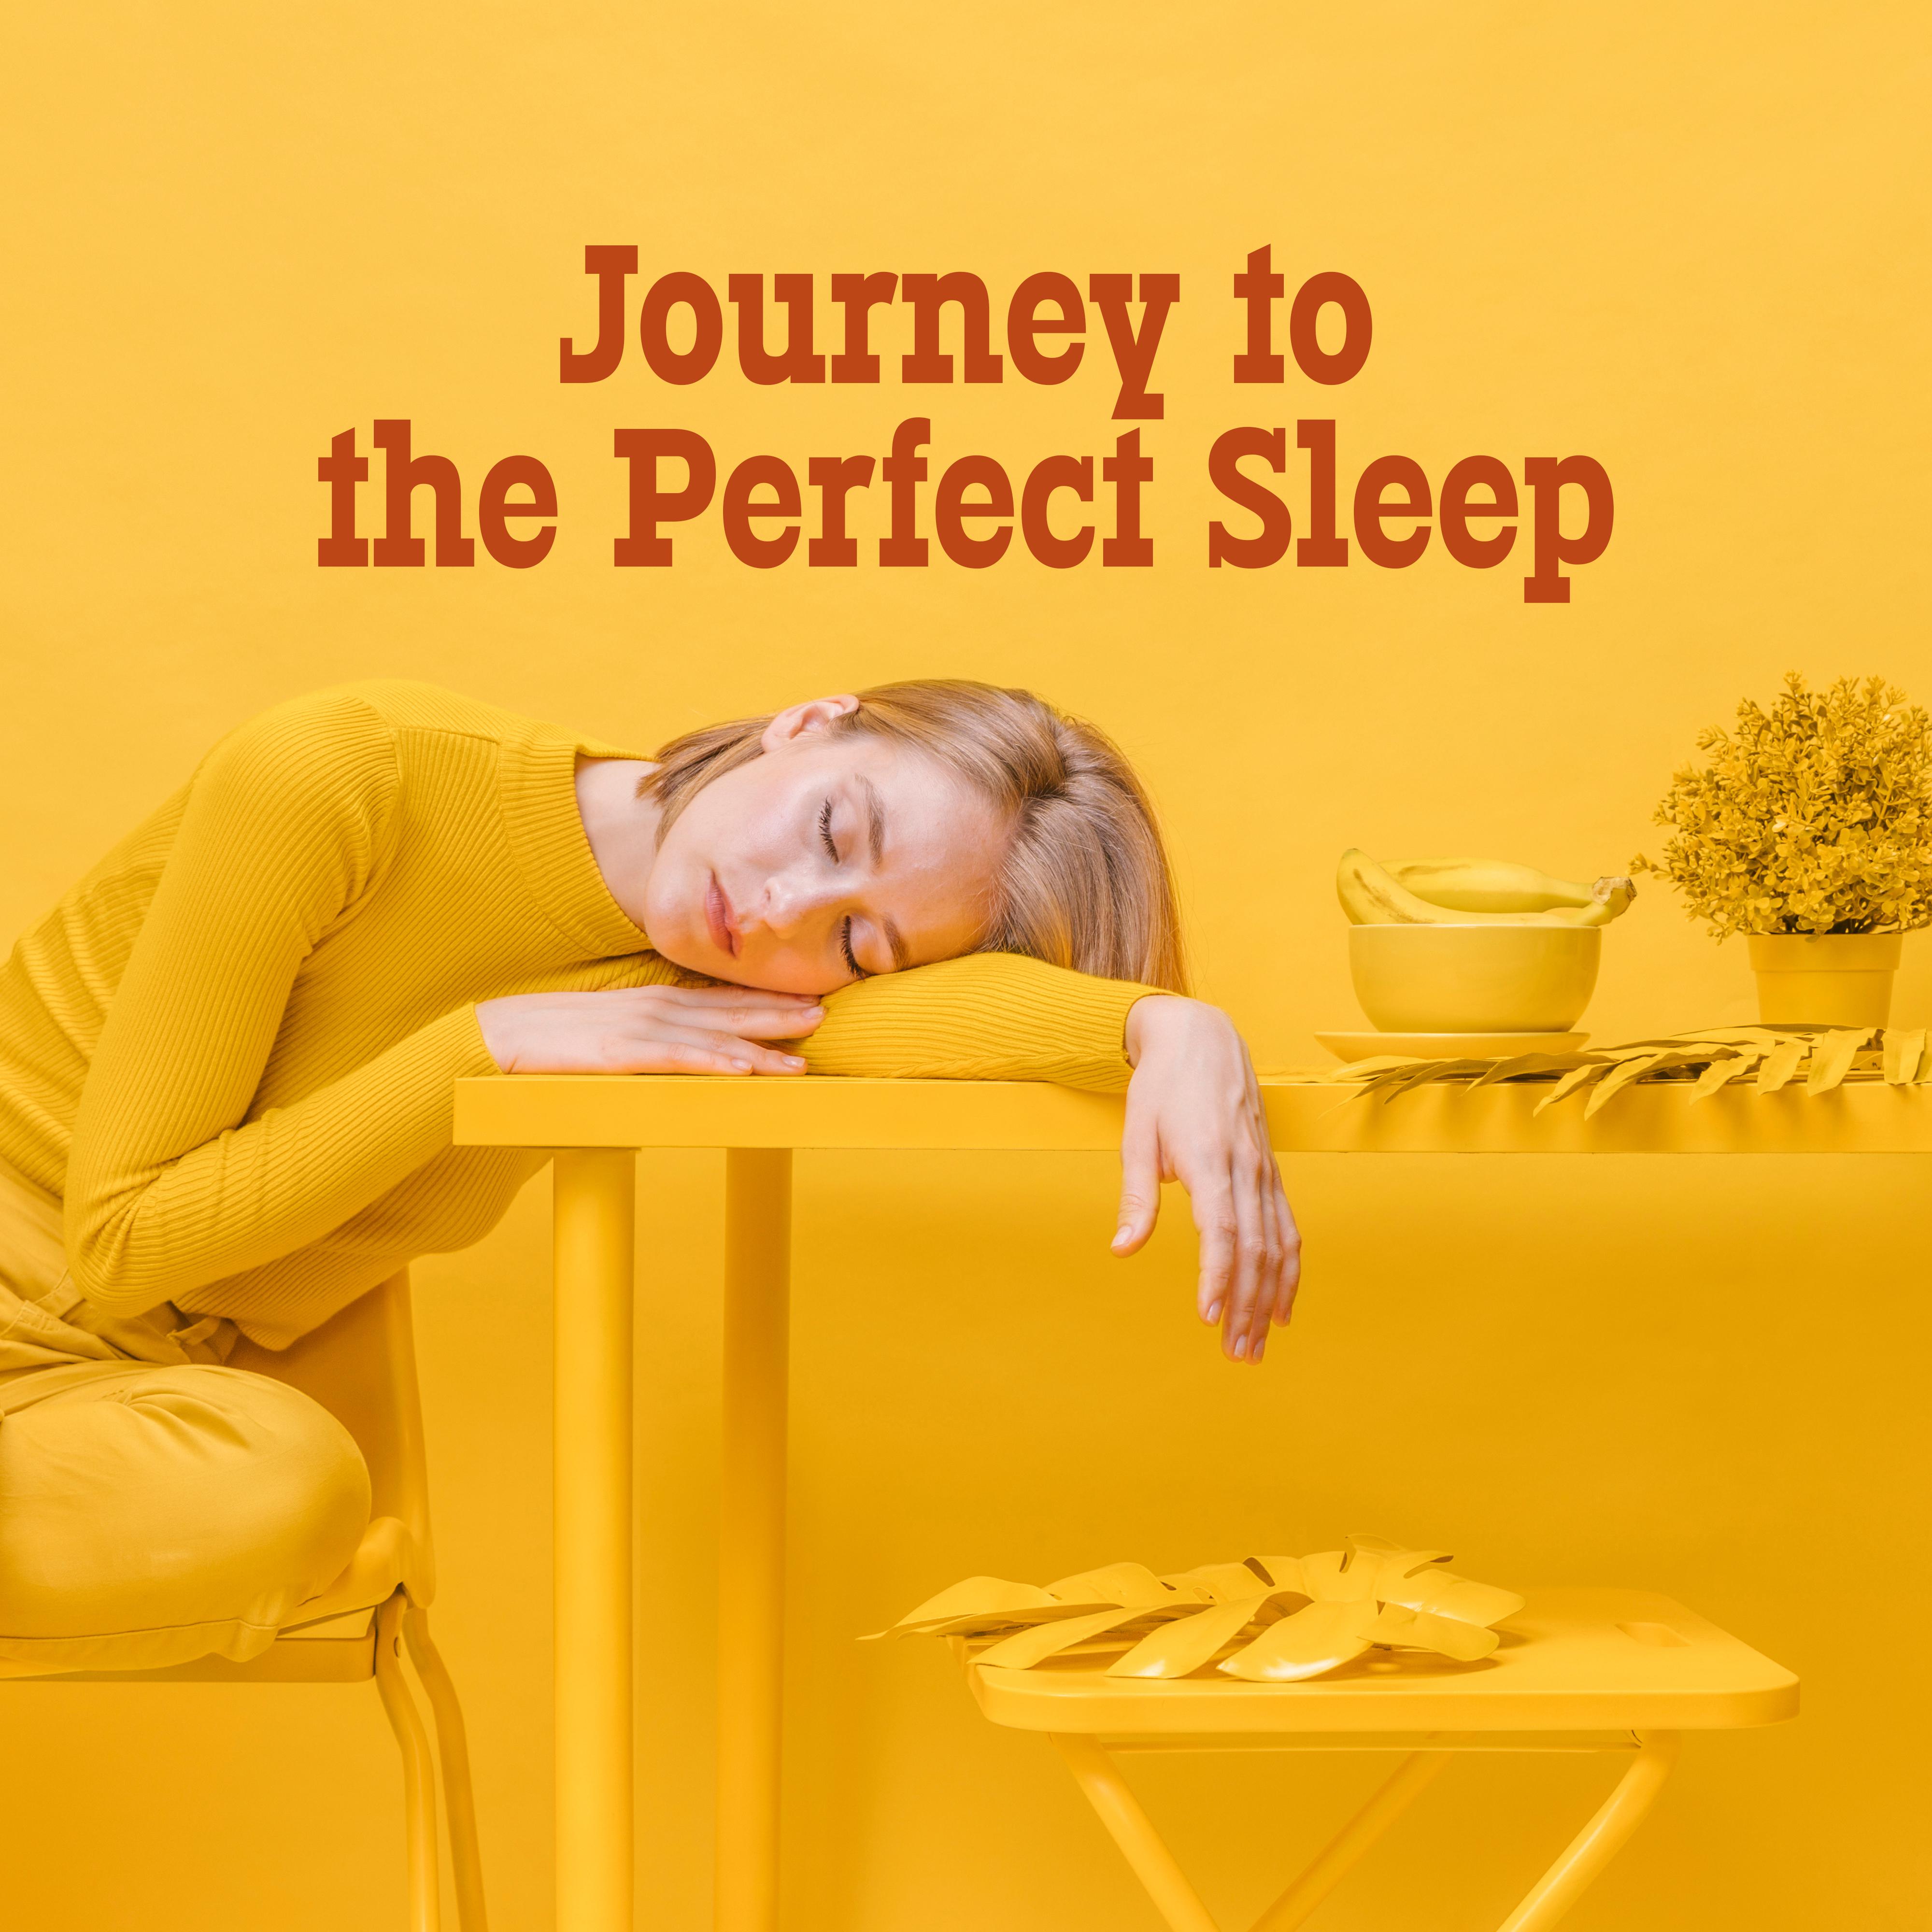 Journey to the Perfect Sleep: Ambient & Nature New Age 2019 Music Composed for Total Calming Down, Rest After Long Day, Sleep Peacefully & Dream Beautiful